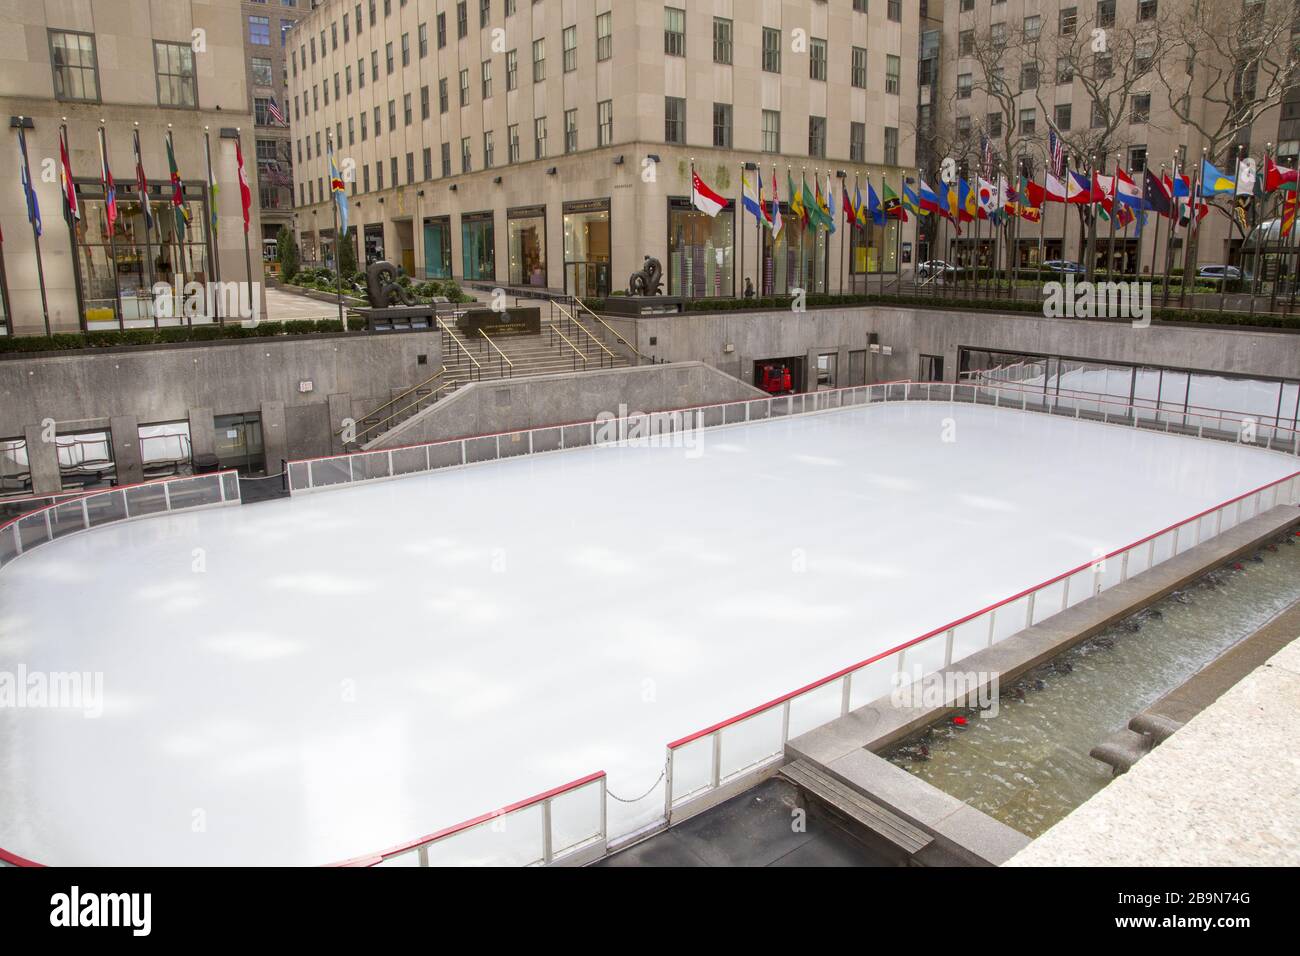 The ice skating rink and the plaza at Rockefeller Center are totally empty  due to the Coronavirus spread in New York City. Stock Photo